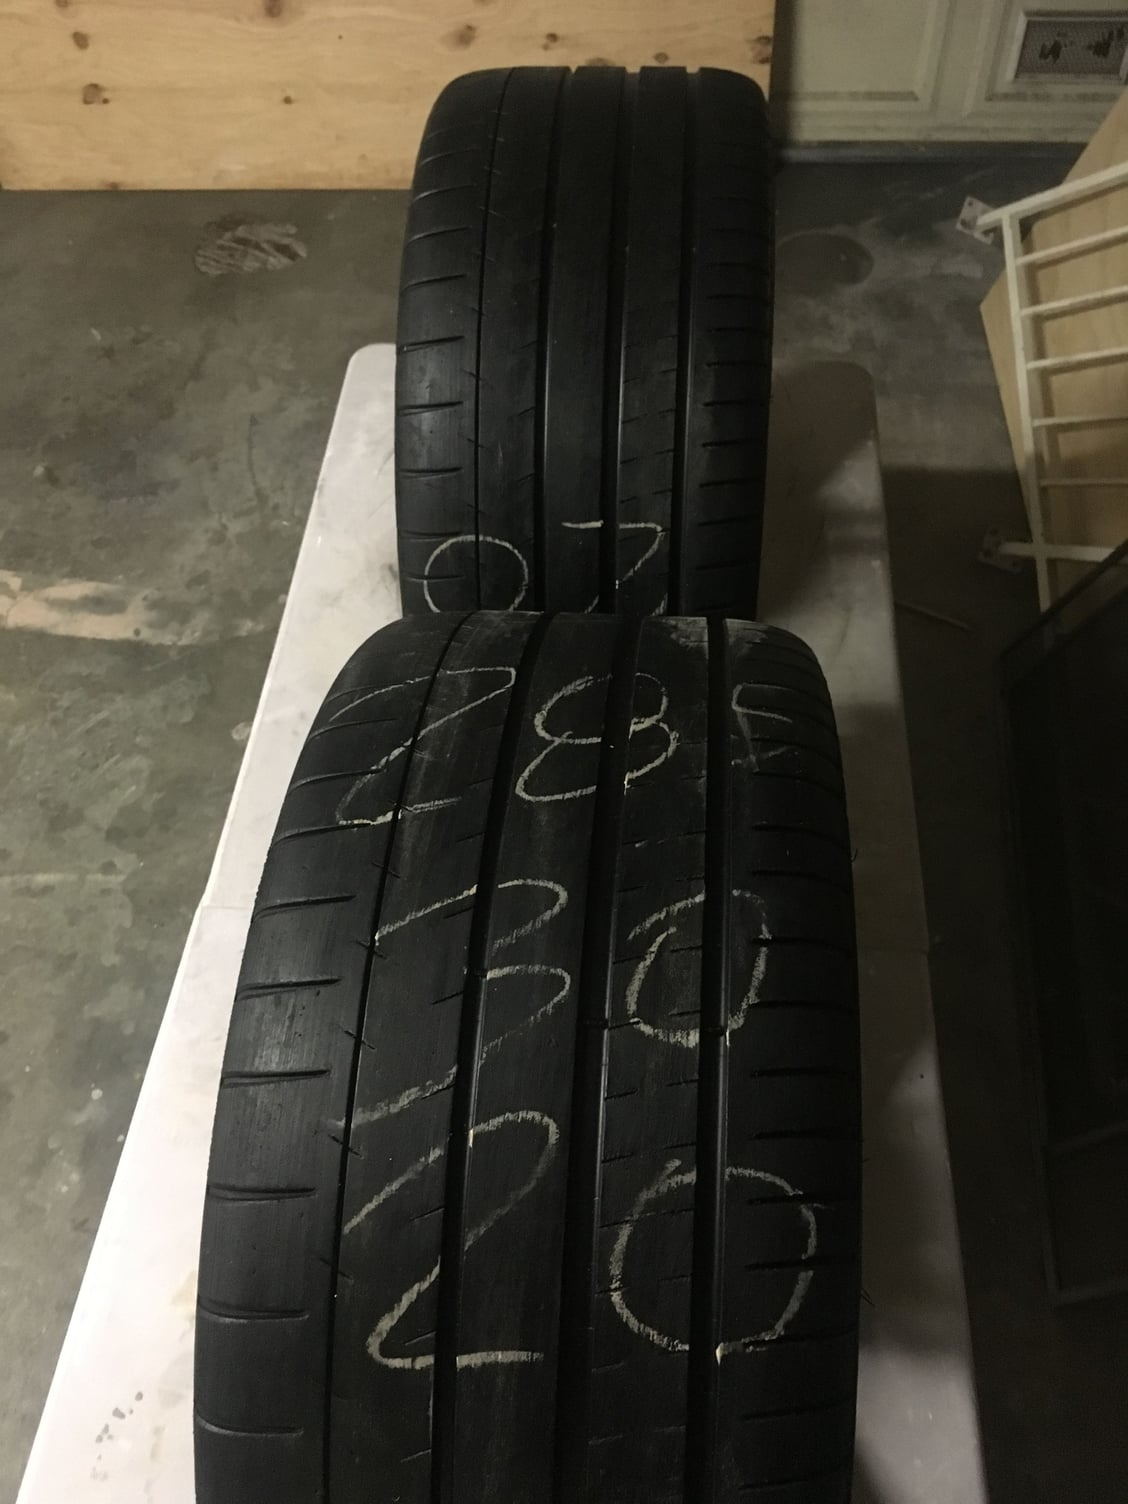 Wheels and Tires/Axles - HRE 547R 20" wheels and tires coming off of a E63 - Used - 2010 to 2016 Mercedes-Benz E63 AMG - Los Angeles, CA 91343, United States